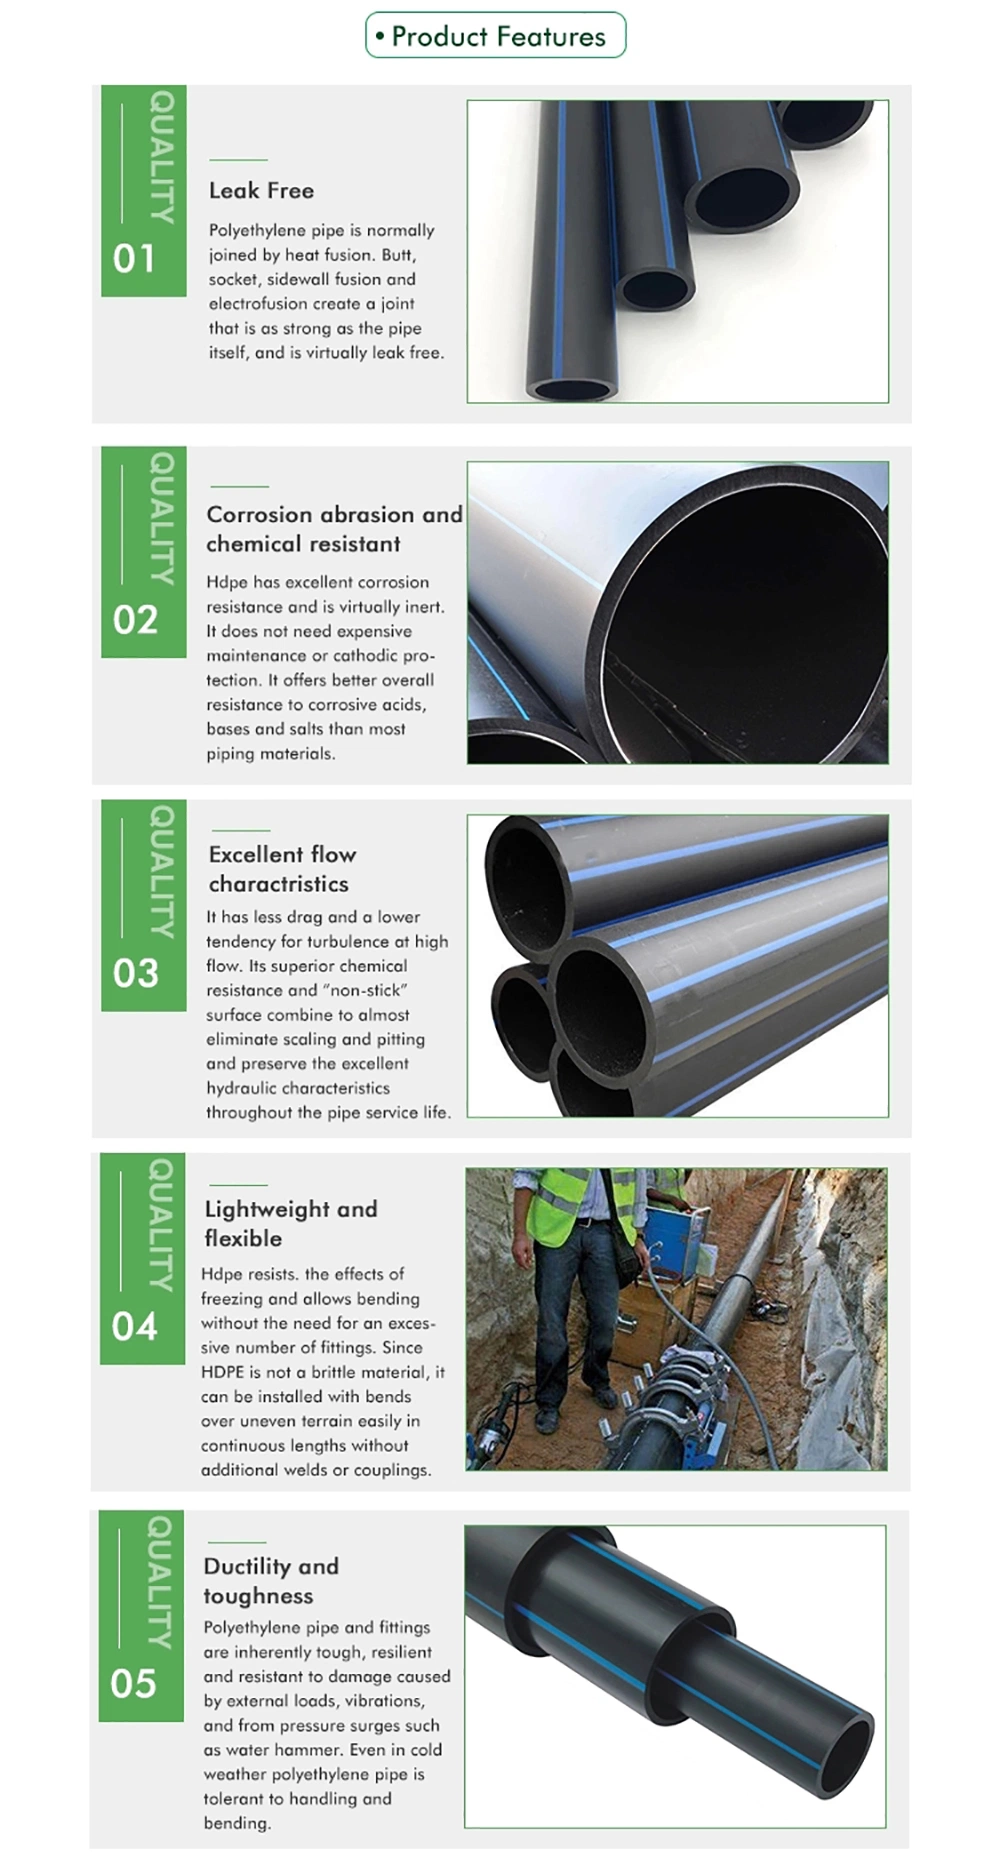 Black Water Supply HDPE Plastic Pipe Suppliers for Sale